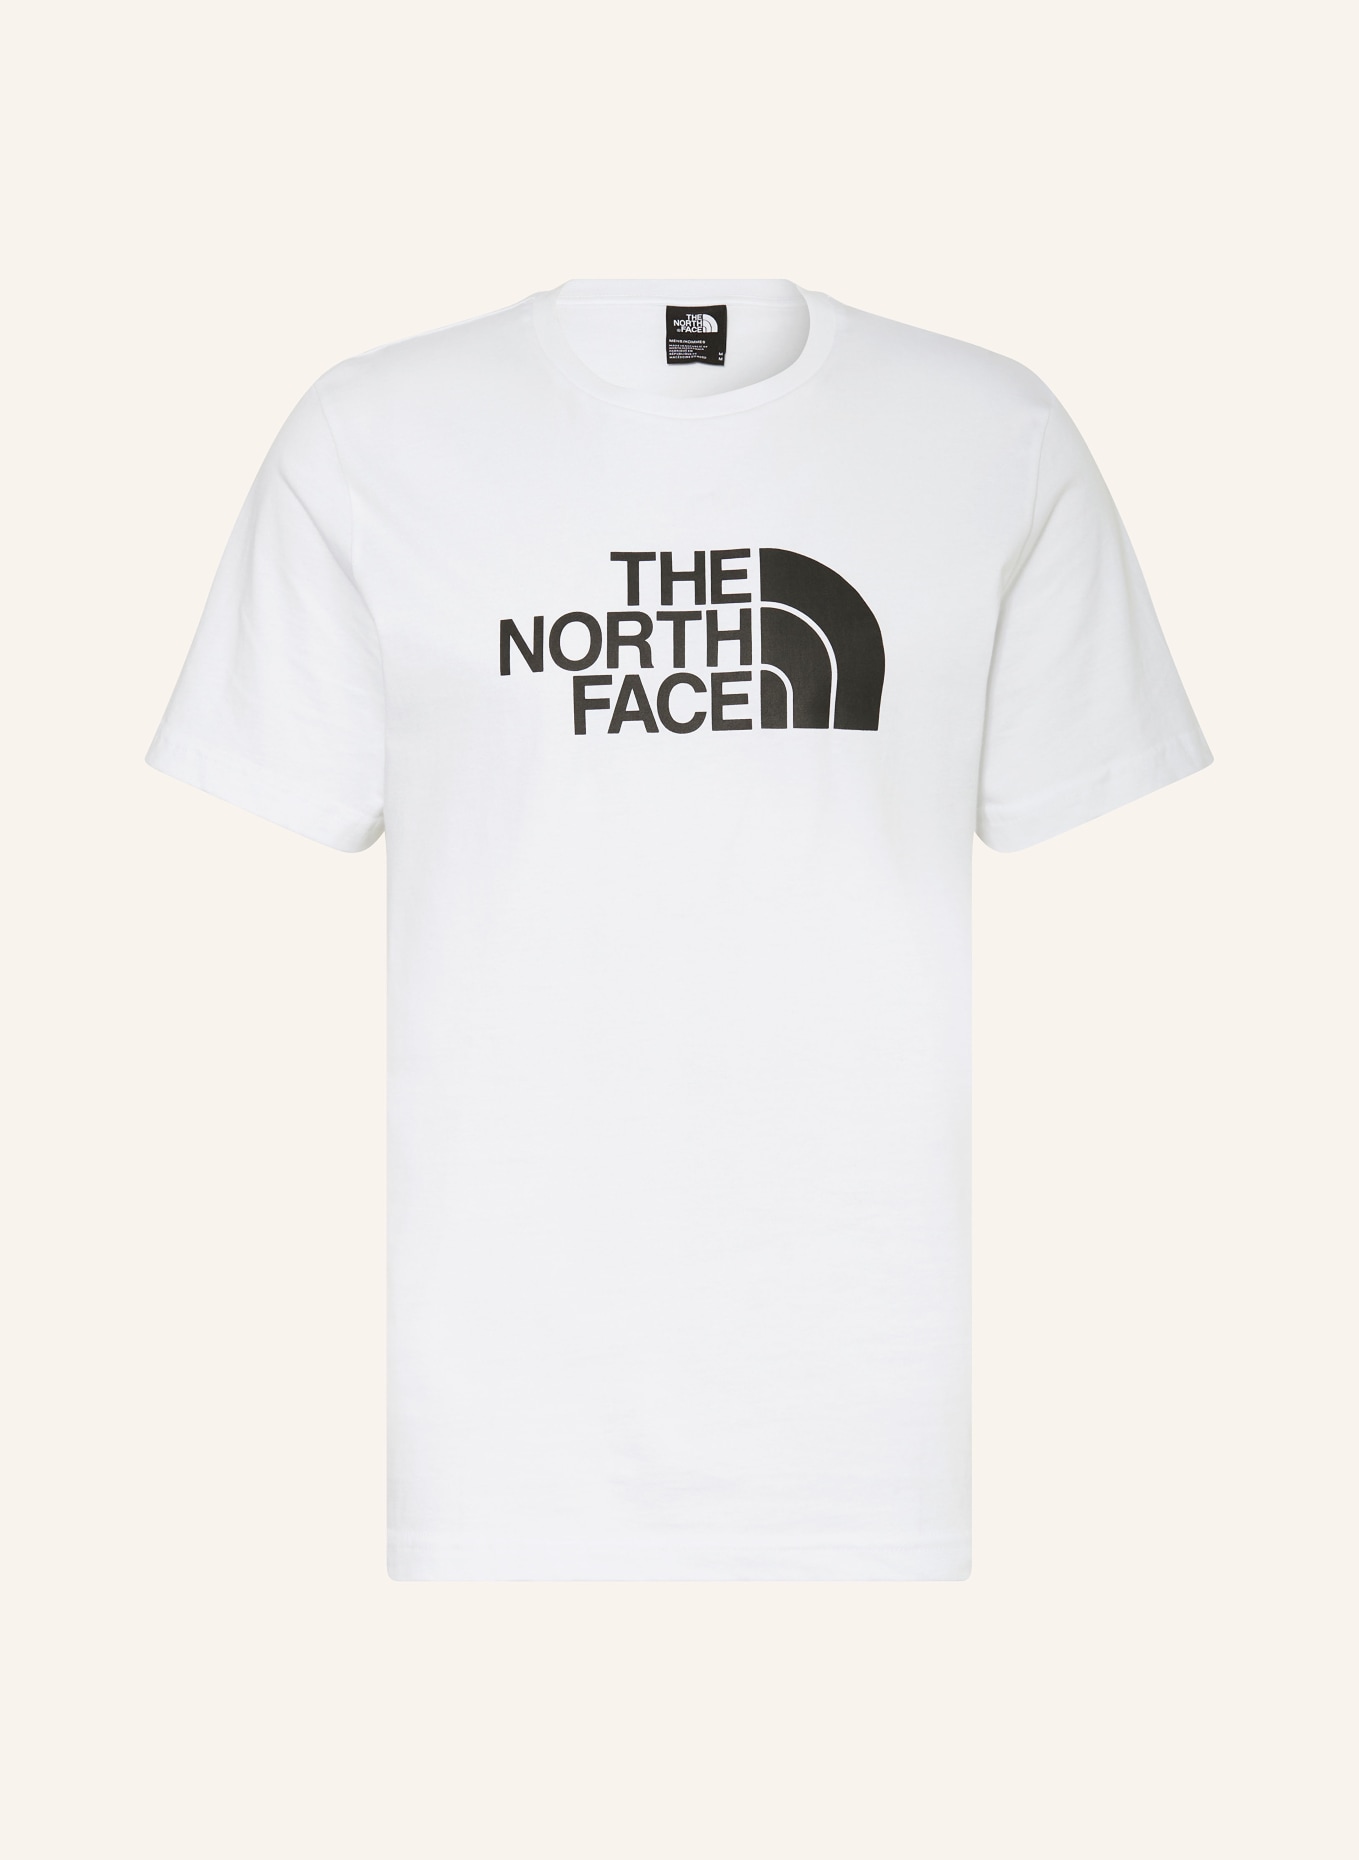 THE NORTH FACE T-Shirt EASY TEE, Farbe: WEISS (Bild 1)